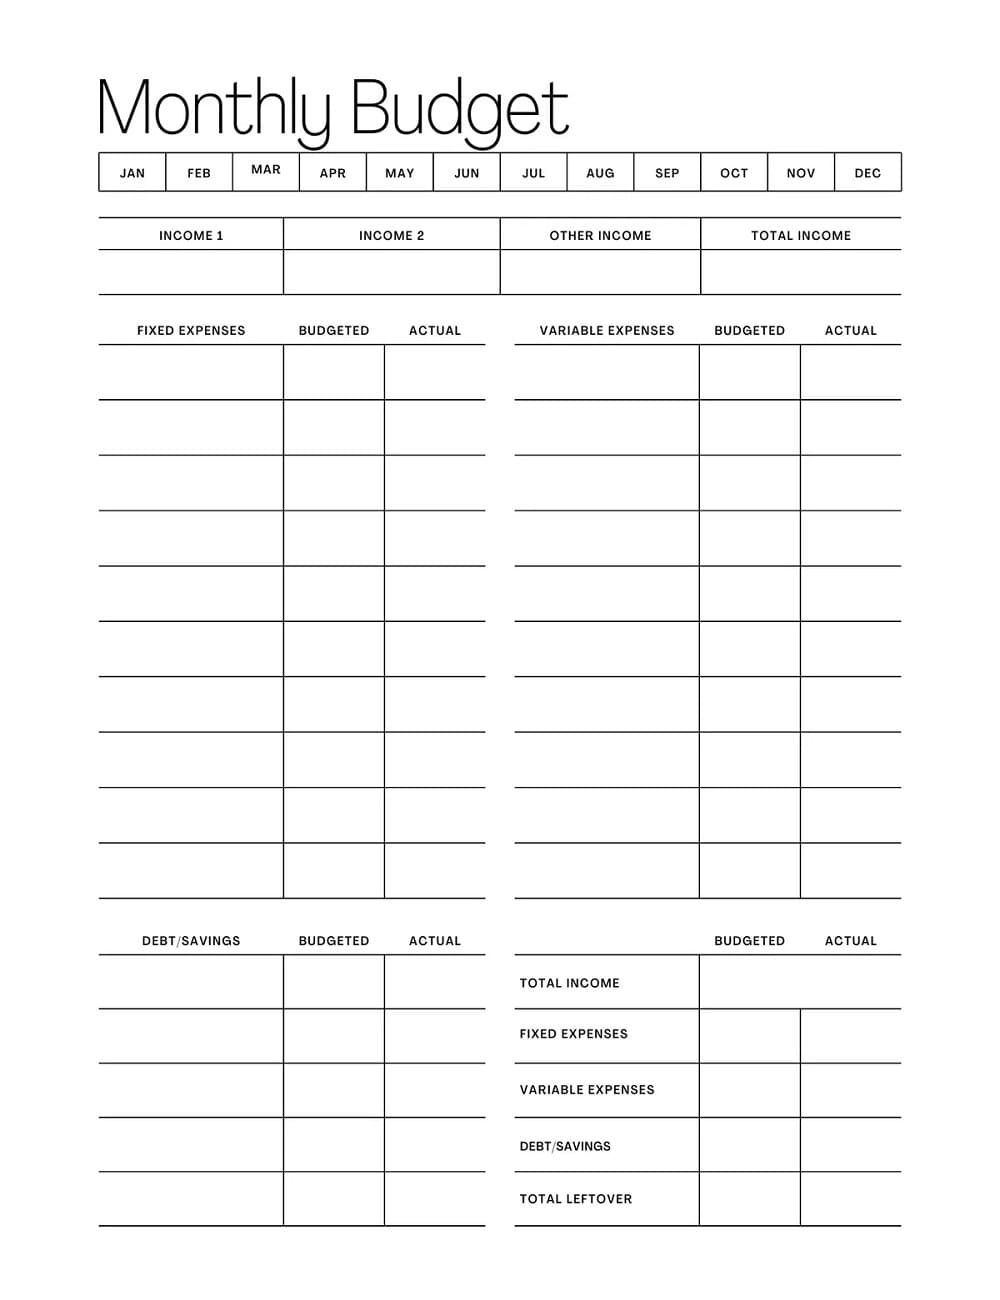 Printable Free Image of Monthly Budget Template